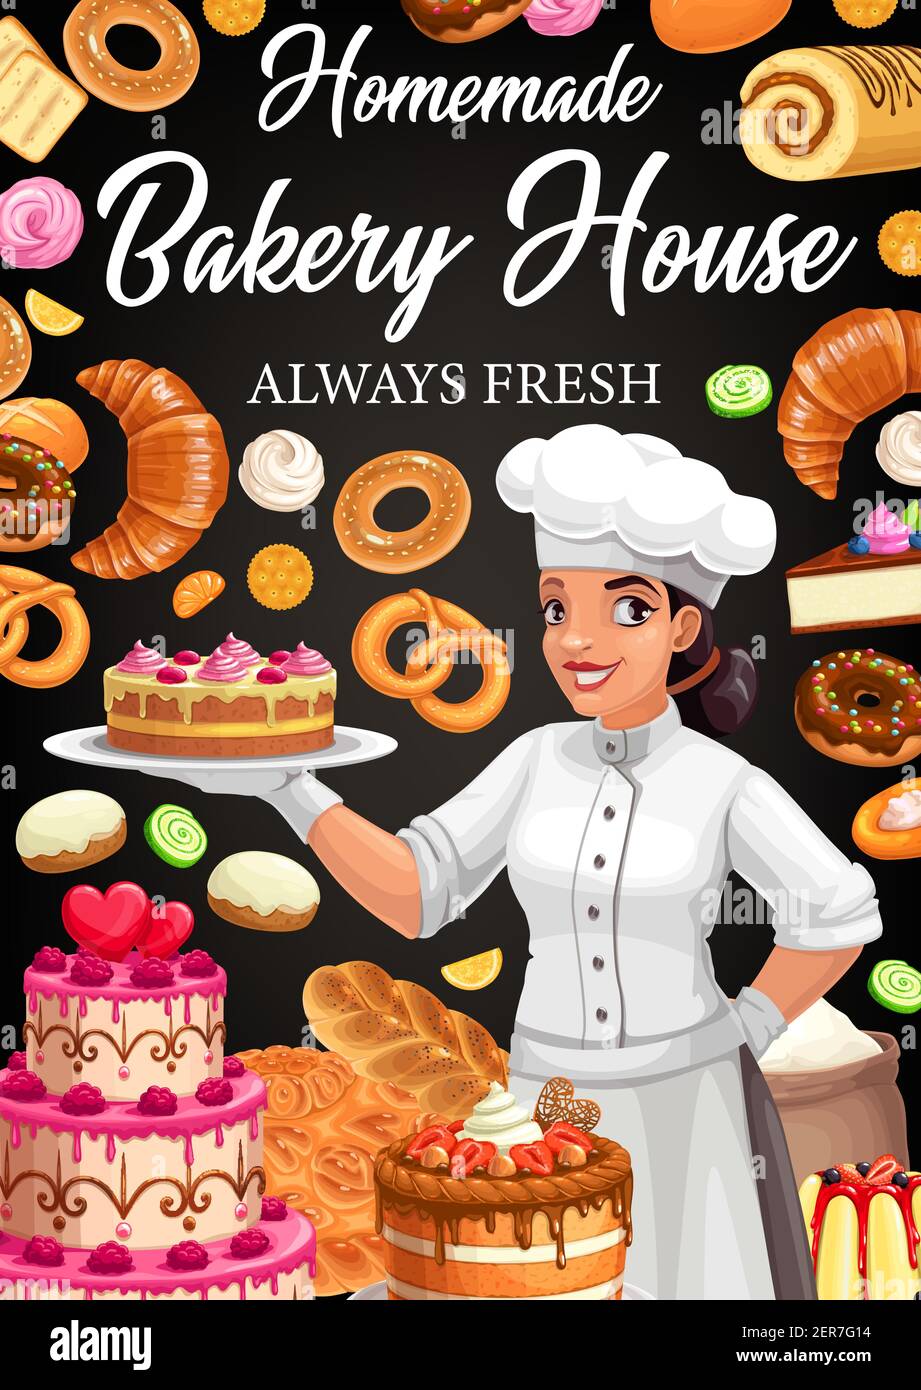 Bakery cafe homemade sweet pastry cartoon poster Vector Image